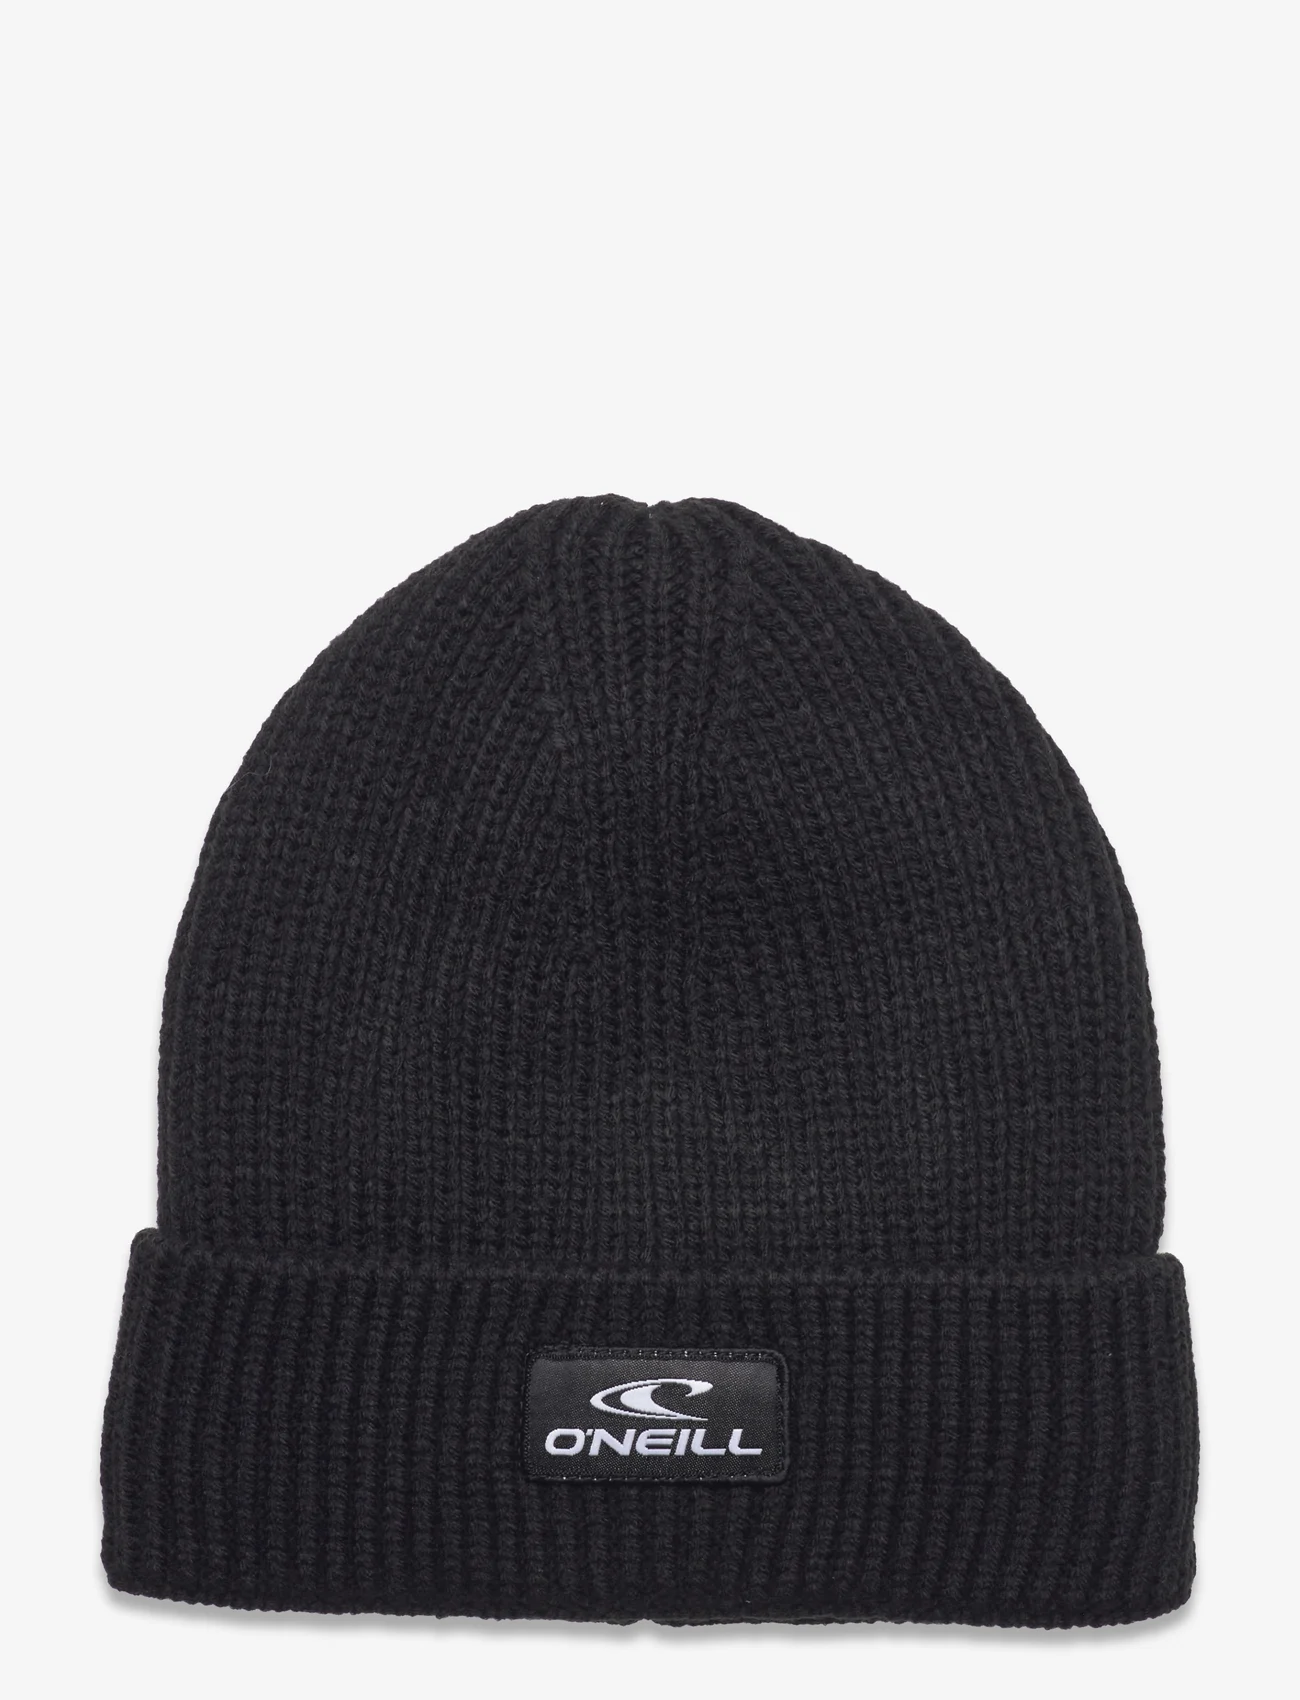 O'neill - BOUNCER BEANIE - hats - black out - 0